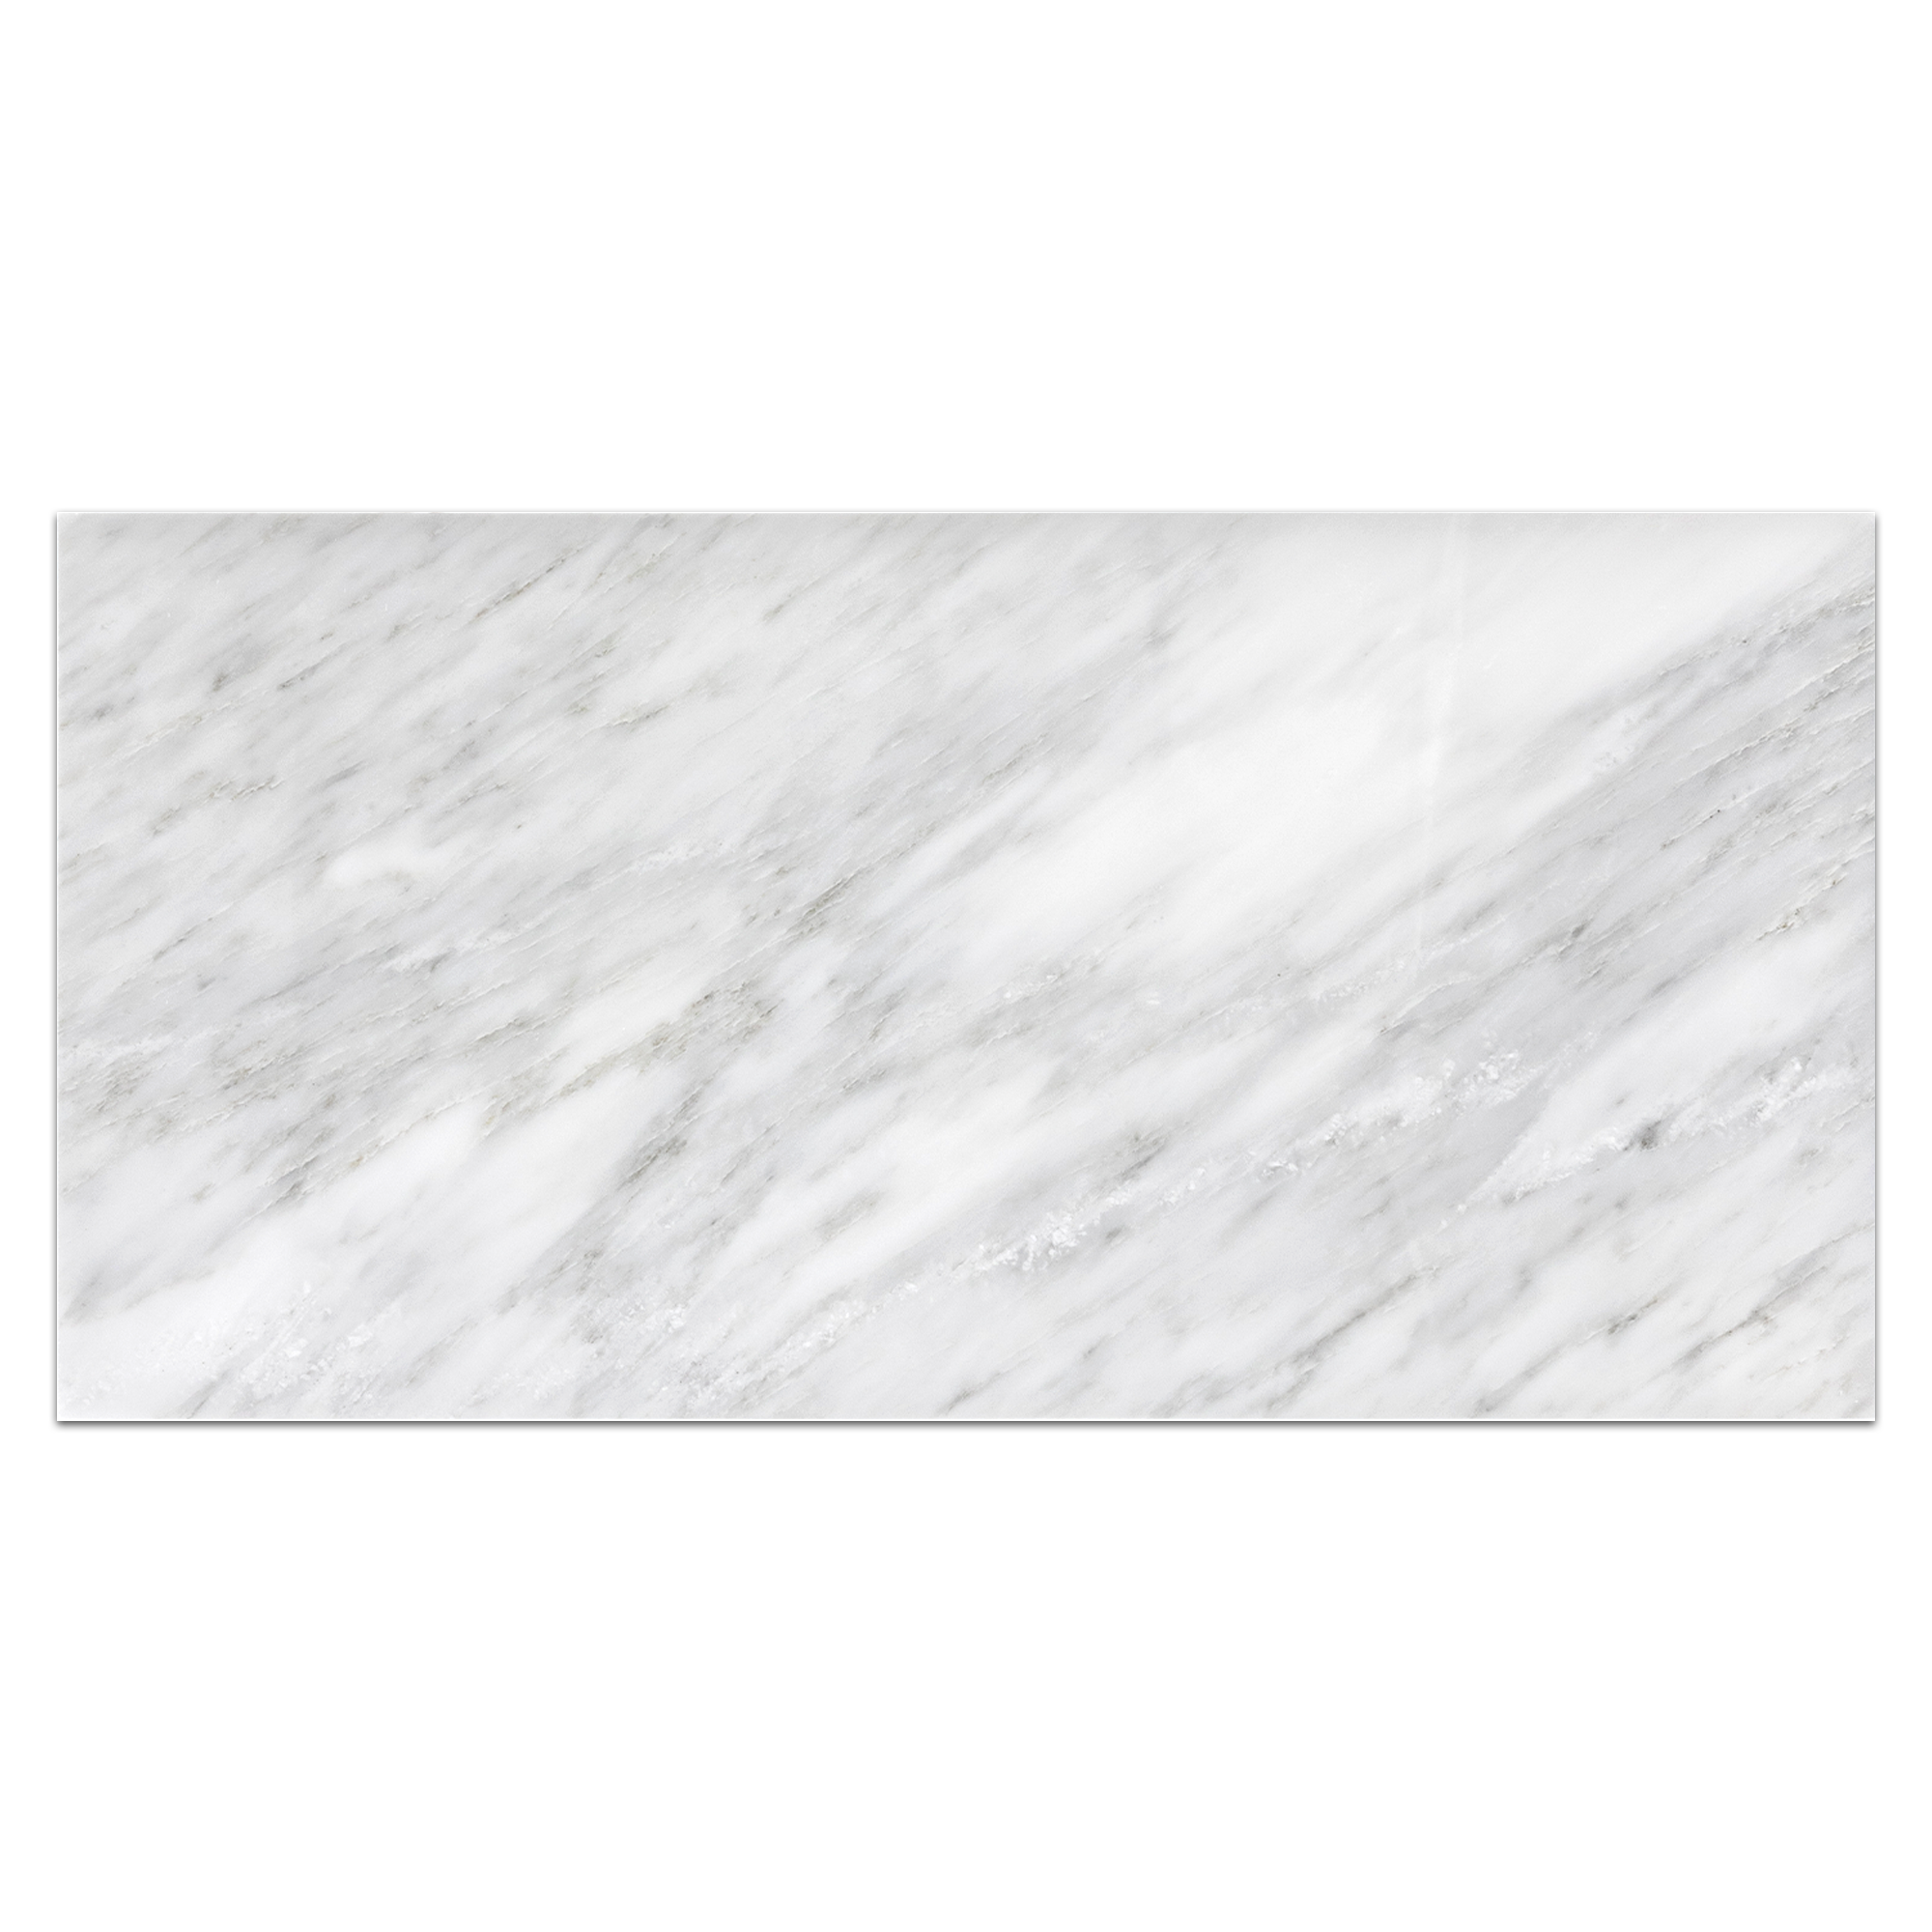 Elon Mystic Gray Marble Rectangle Field Tile 12x24x0.375 Polished - Surface Group International